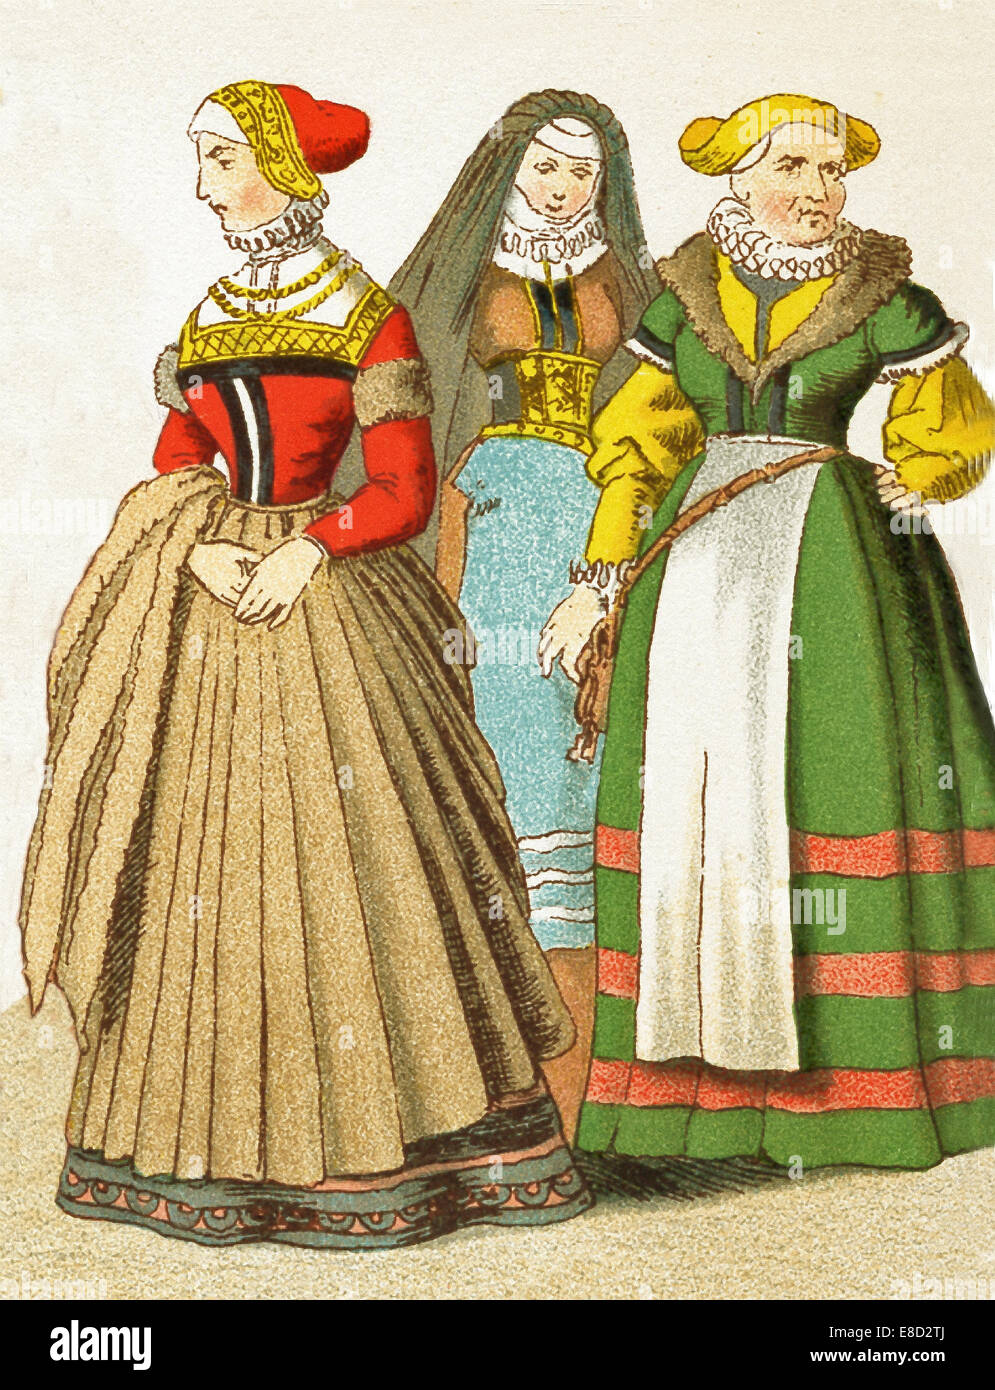 The German  figures represented here are, from left to right: woman from Nuremberg, woman from Frankfurt, woman from Swabia. Stock Photo